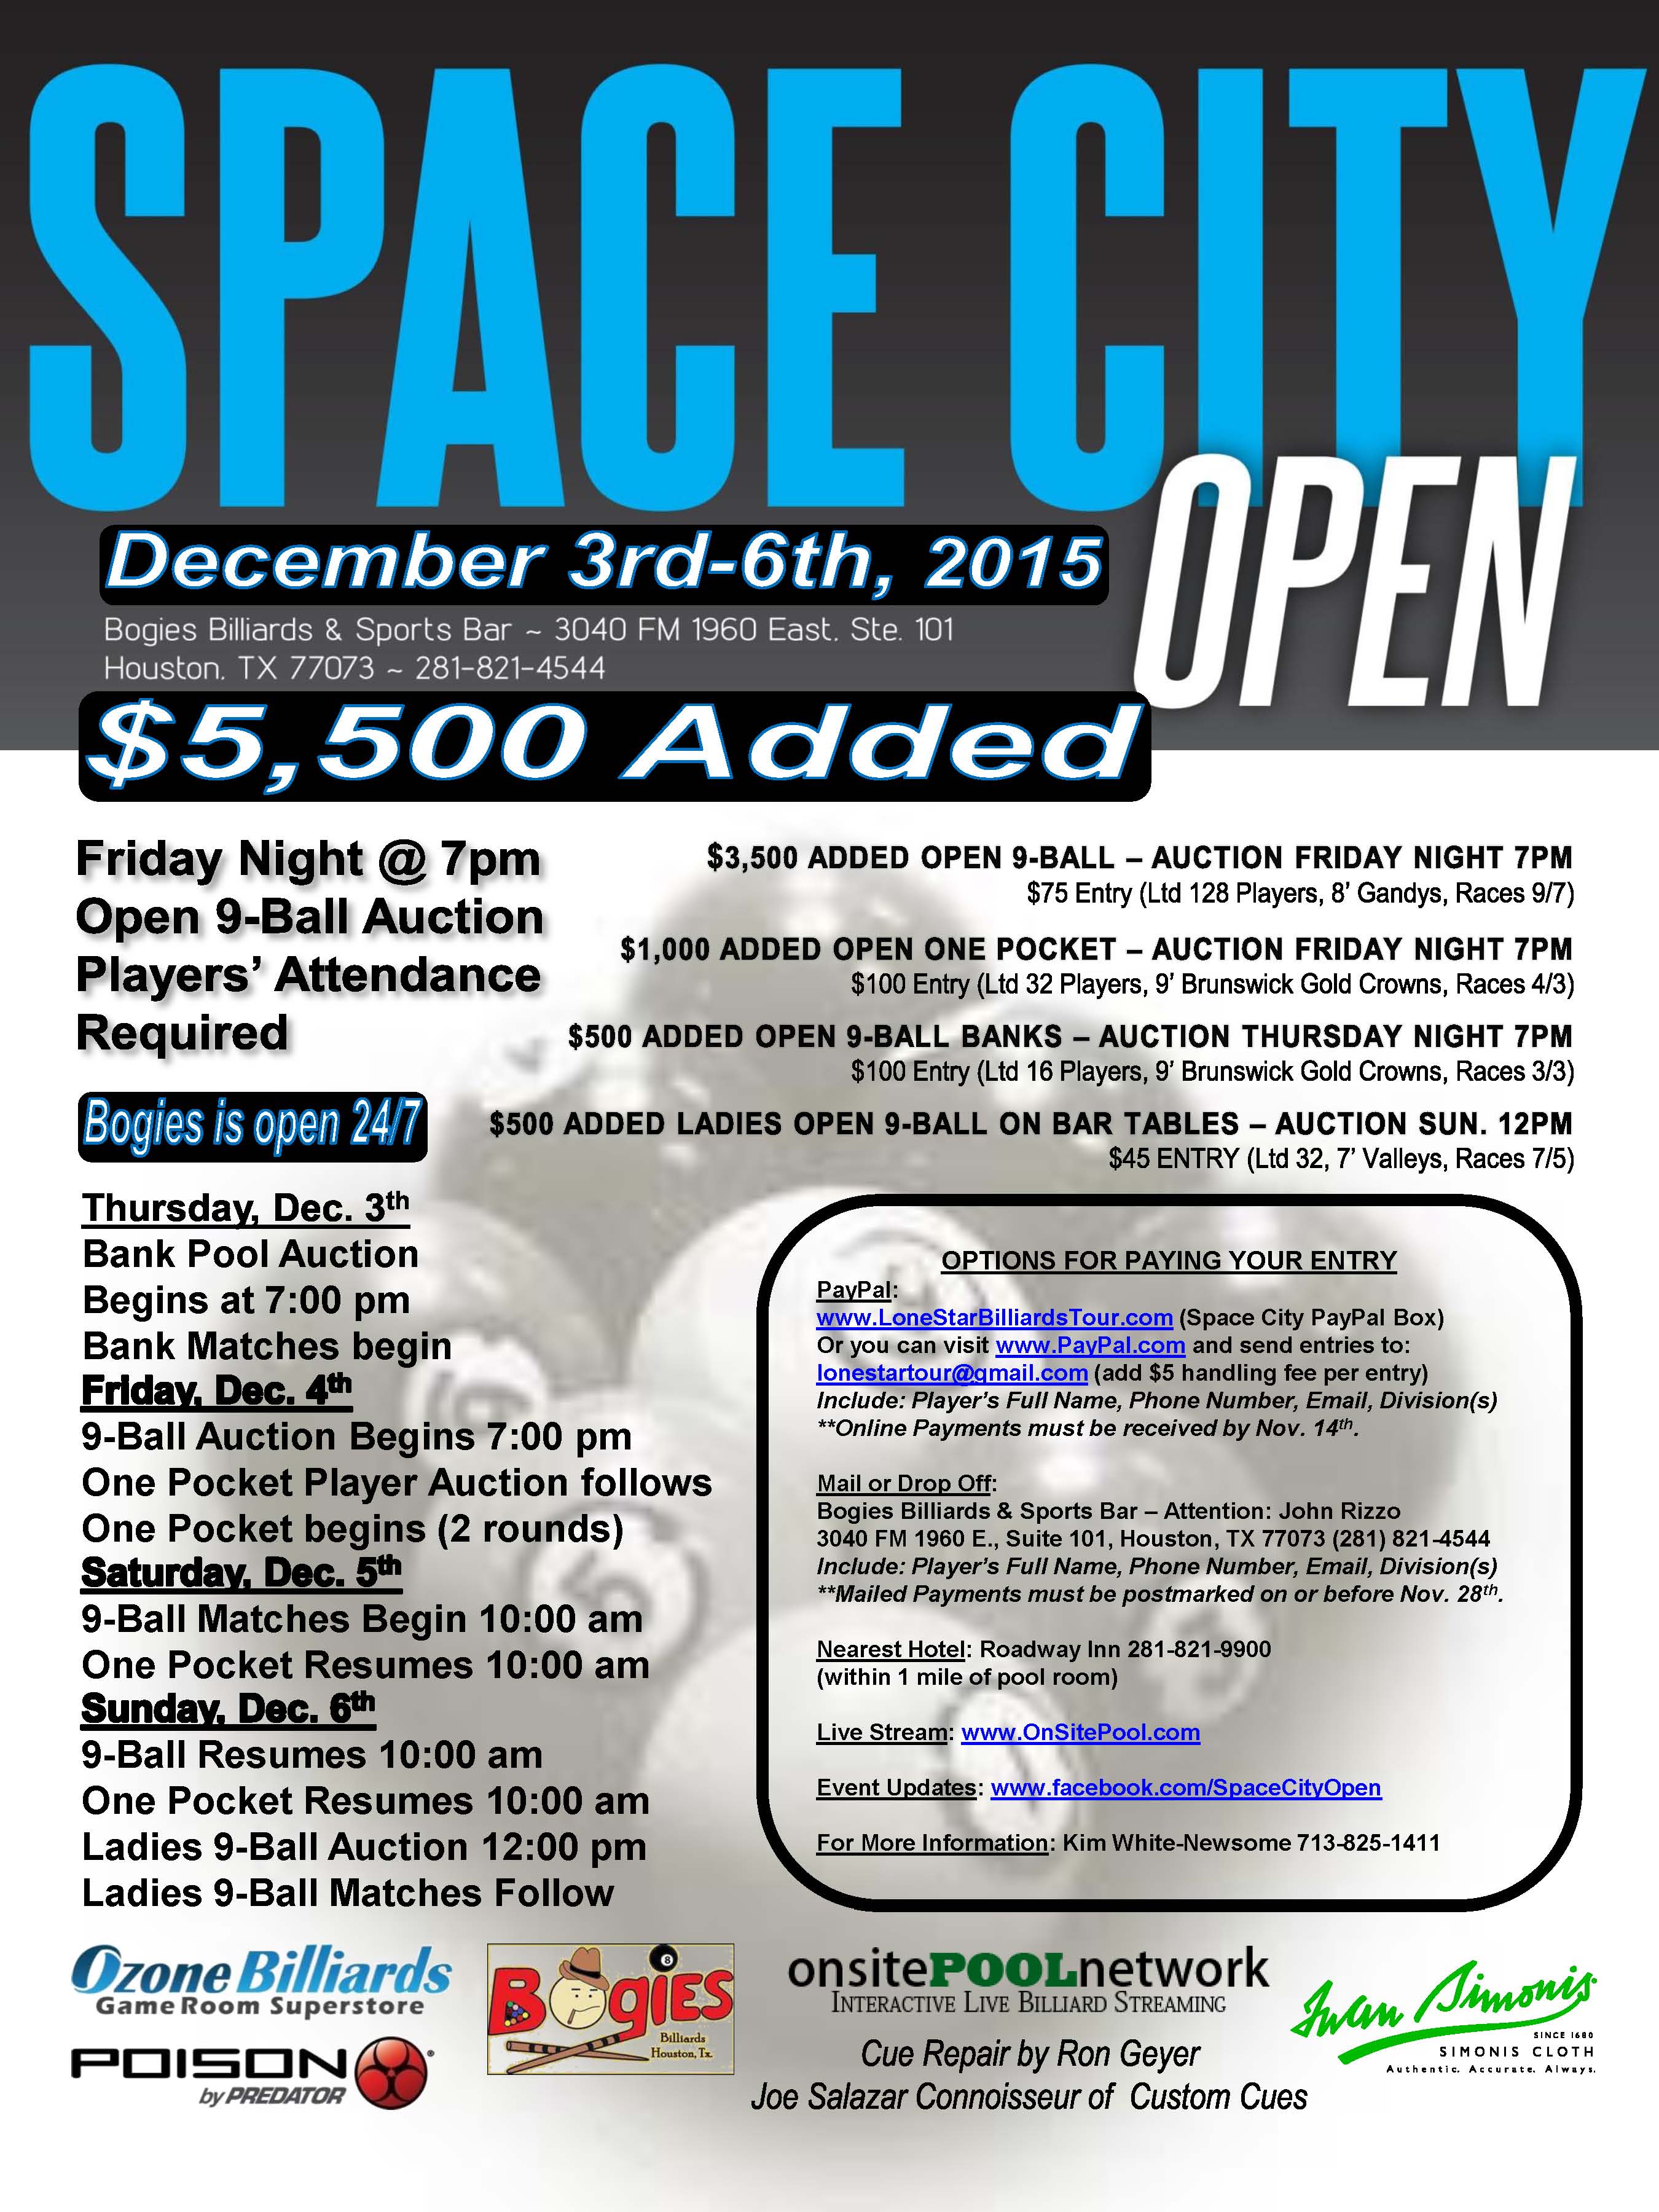 Space City Open IV wed